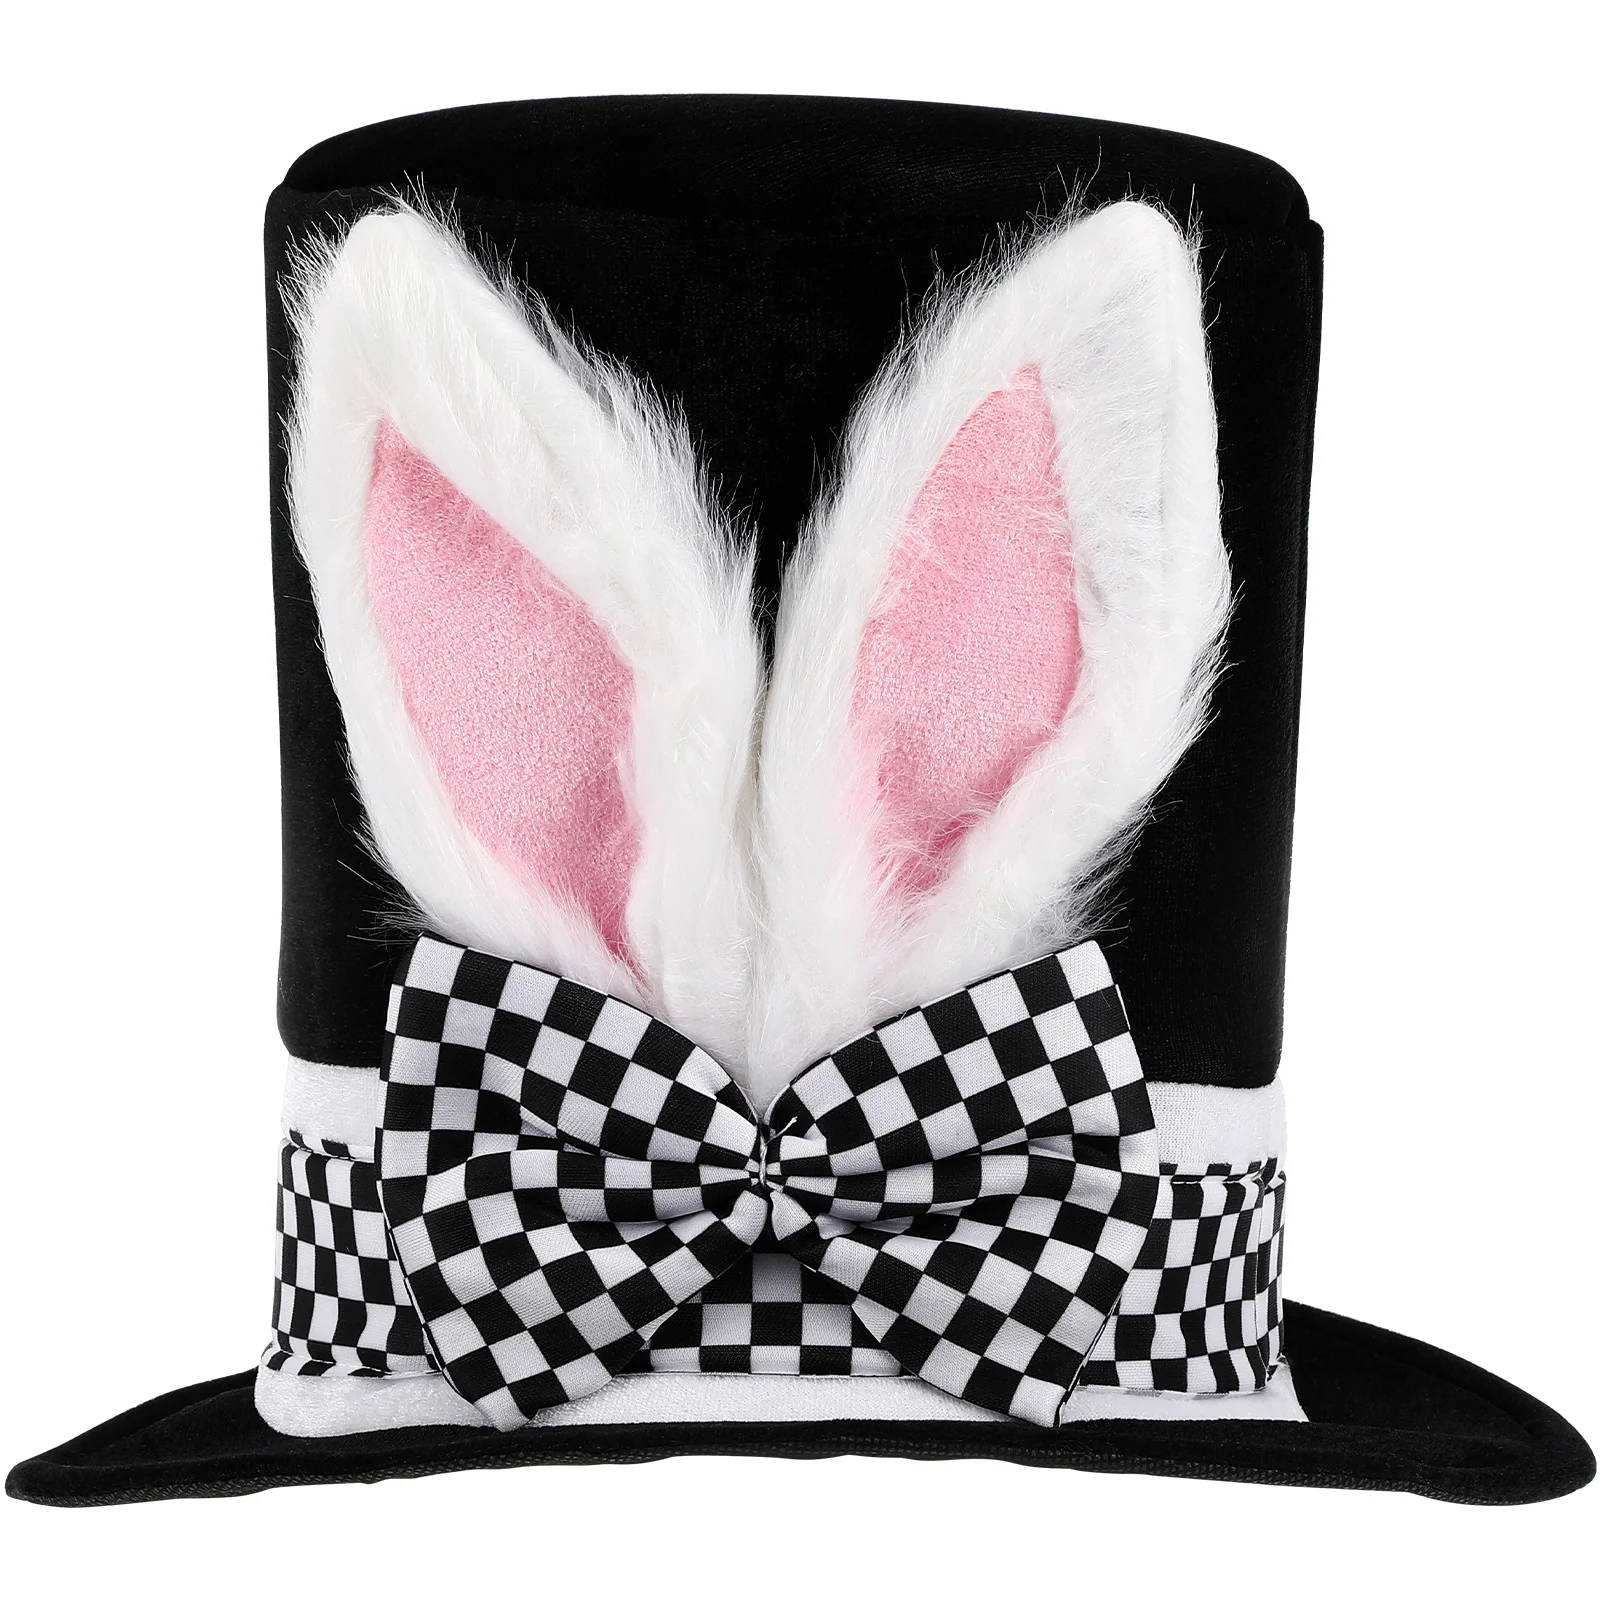 

Hat Costume Easter Bunny Rabbit White Hats Women Adult Plush Ears Men Bonnet Ear Fairy Party Cosplay Costumes Accessories Black